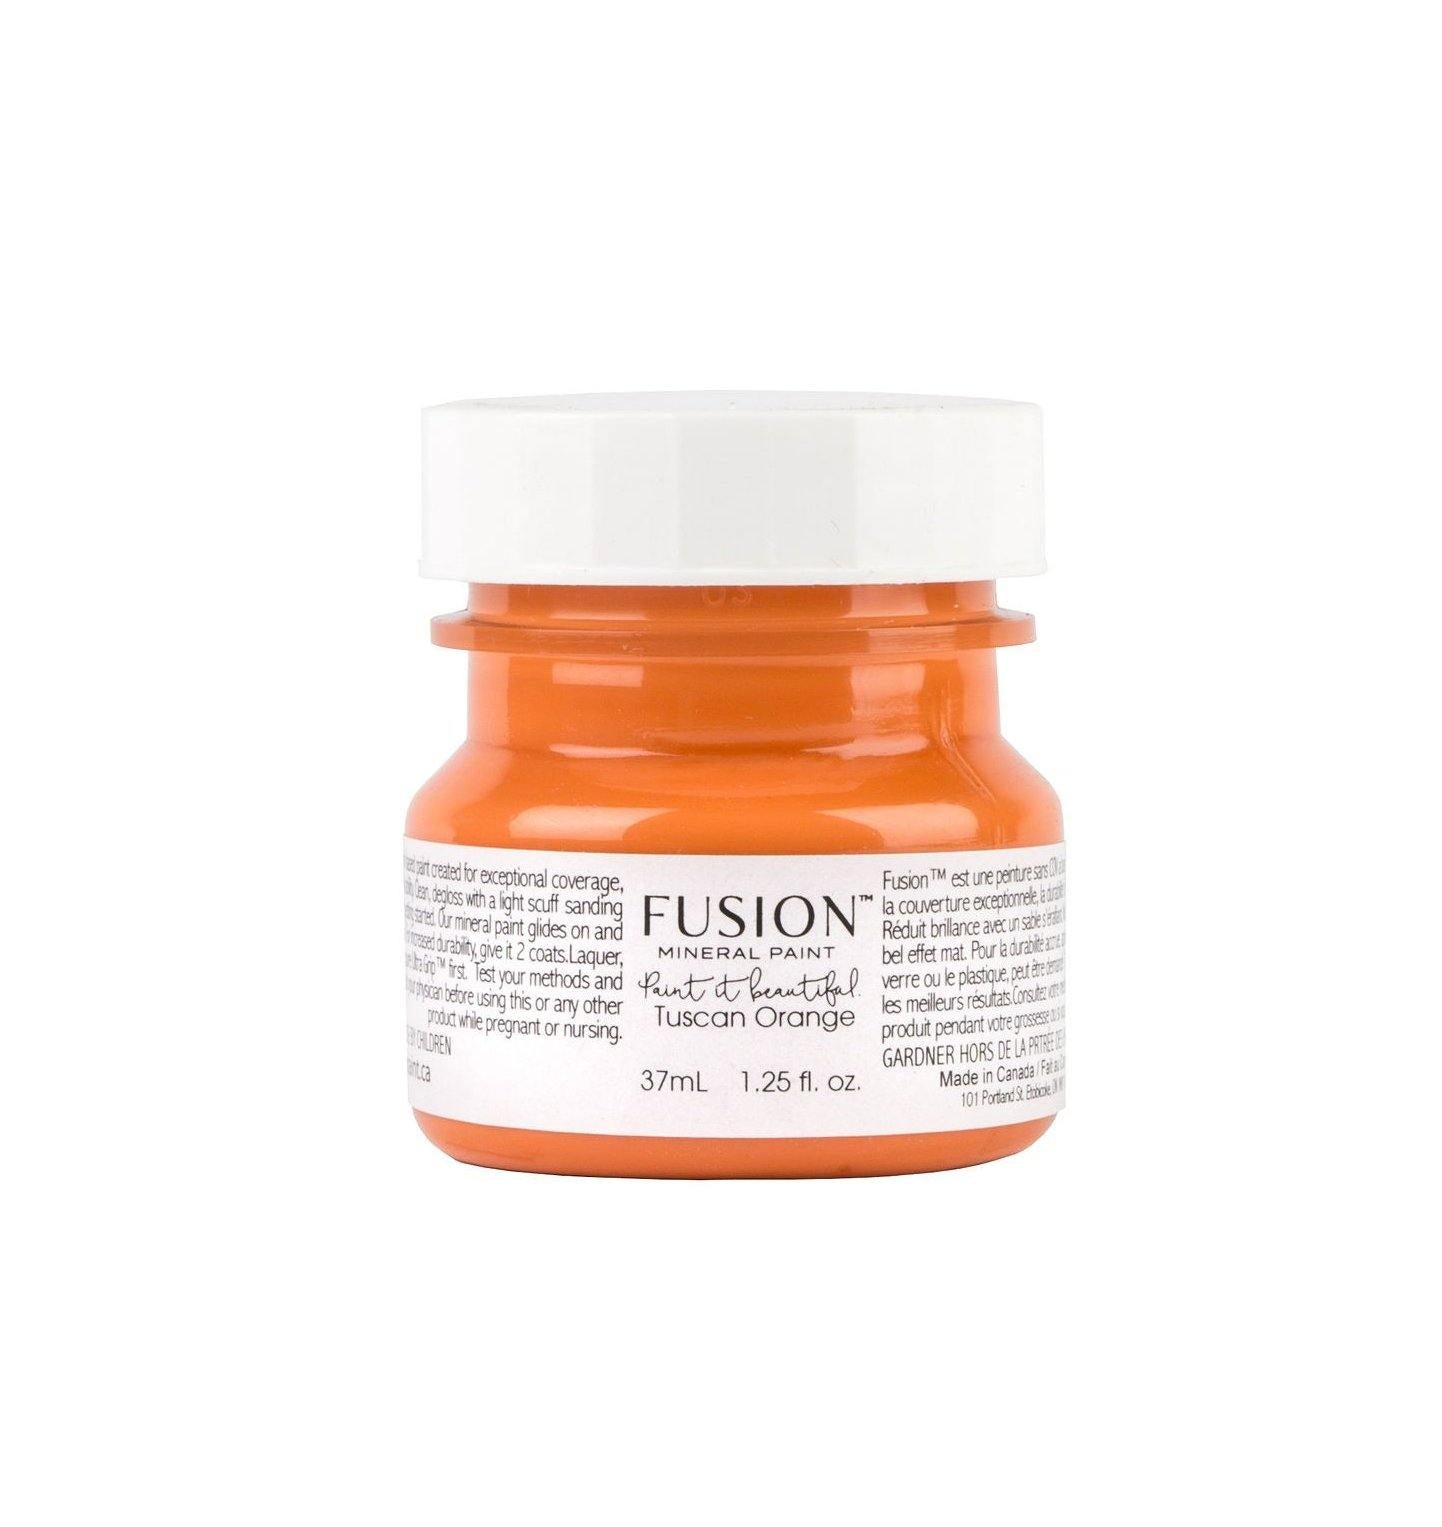 Fusion Mineral Paint Tuscan Orange Tester